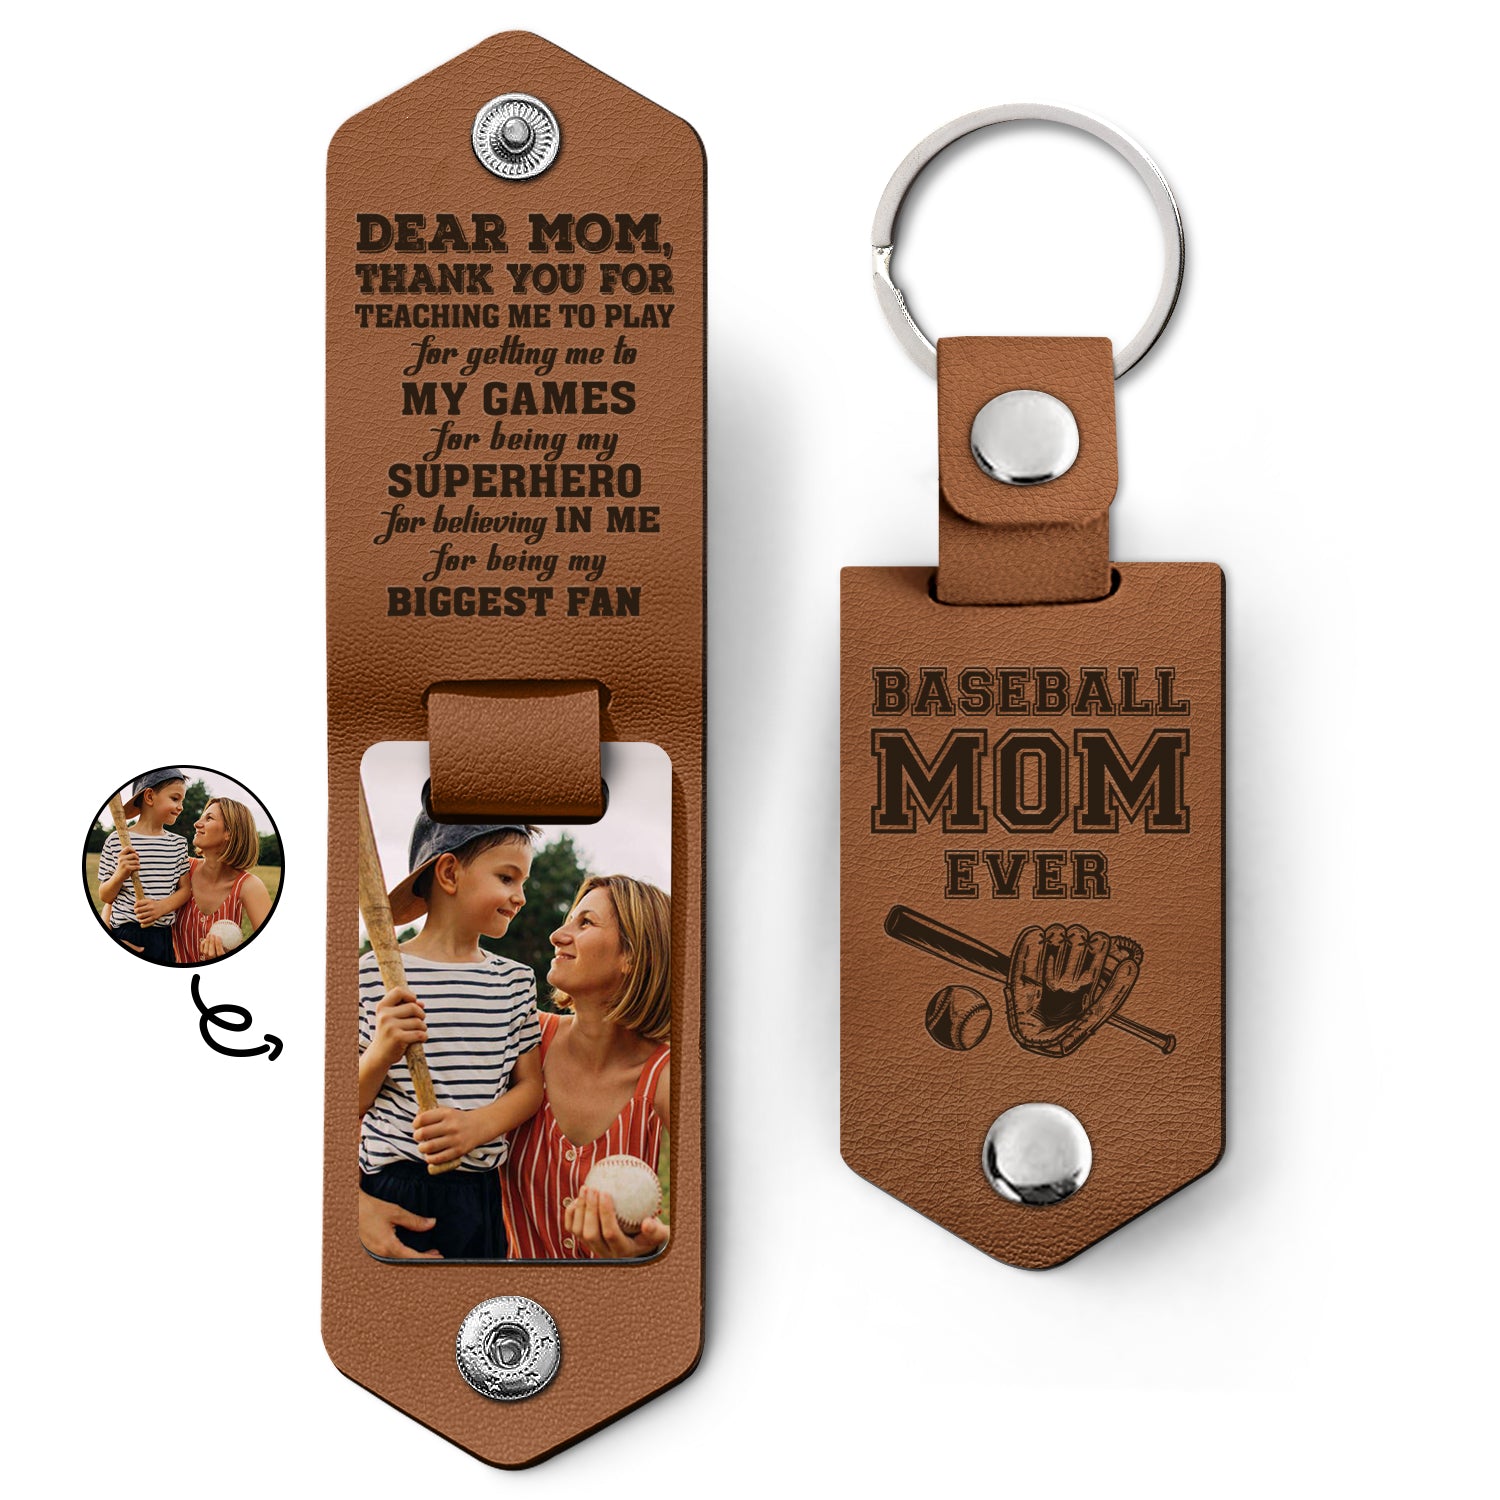 Custom Photo Dear Mom Thank You For Teaching Me - Birthday, Loving Gift For Baseball, Softball Mother - Personalized Leather Photo Keychain